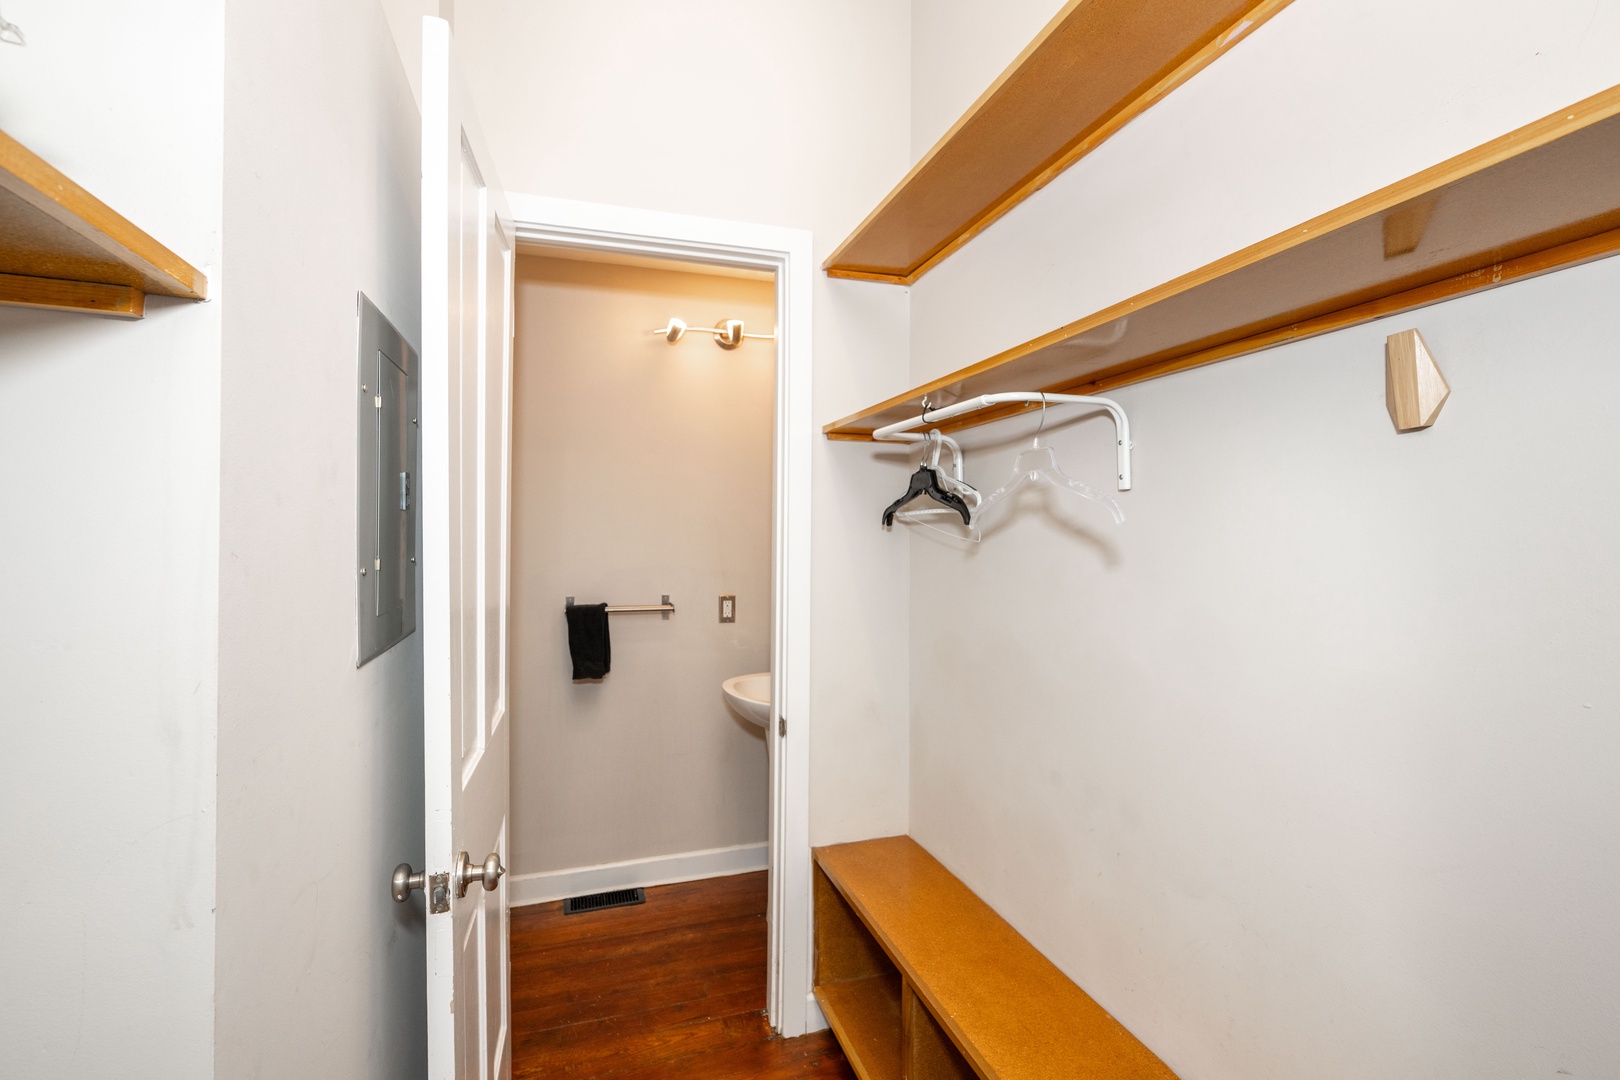 A convenient half bath is available on the first floor